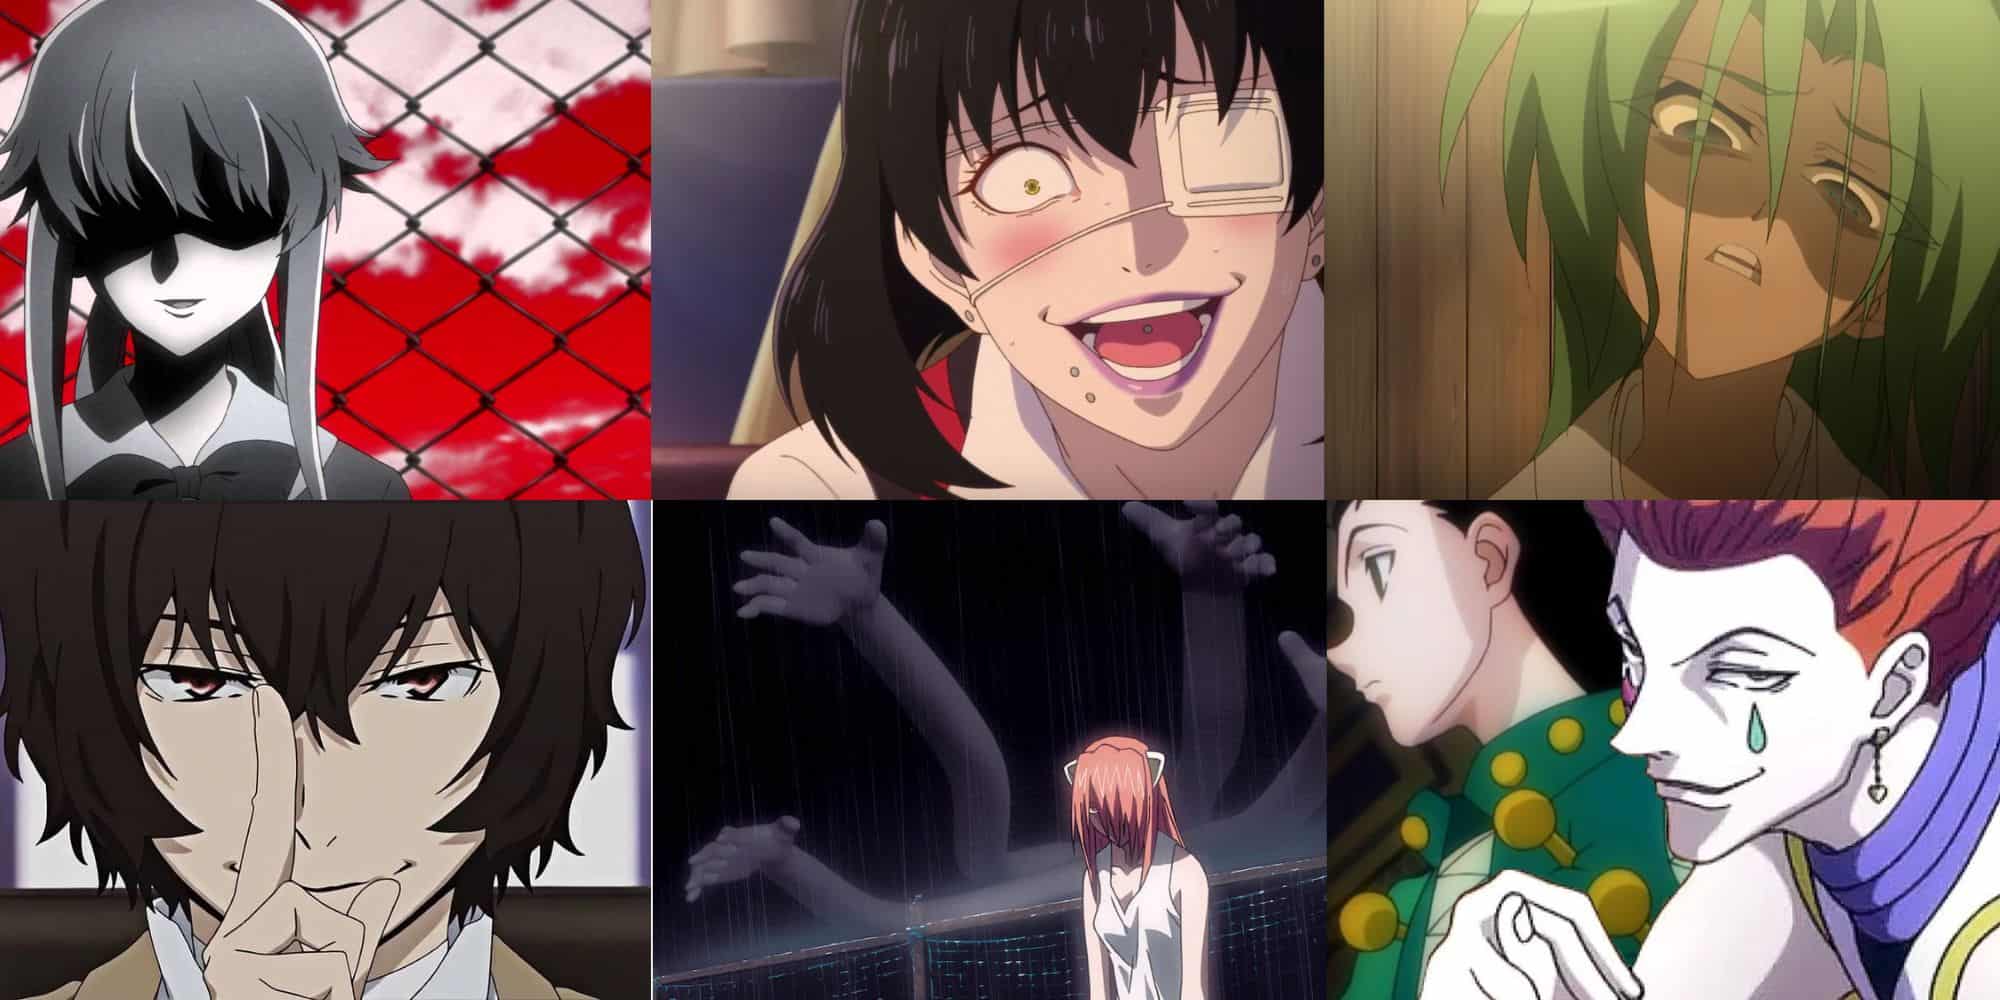 Anime To Watch Where MC Is A Psychopath